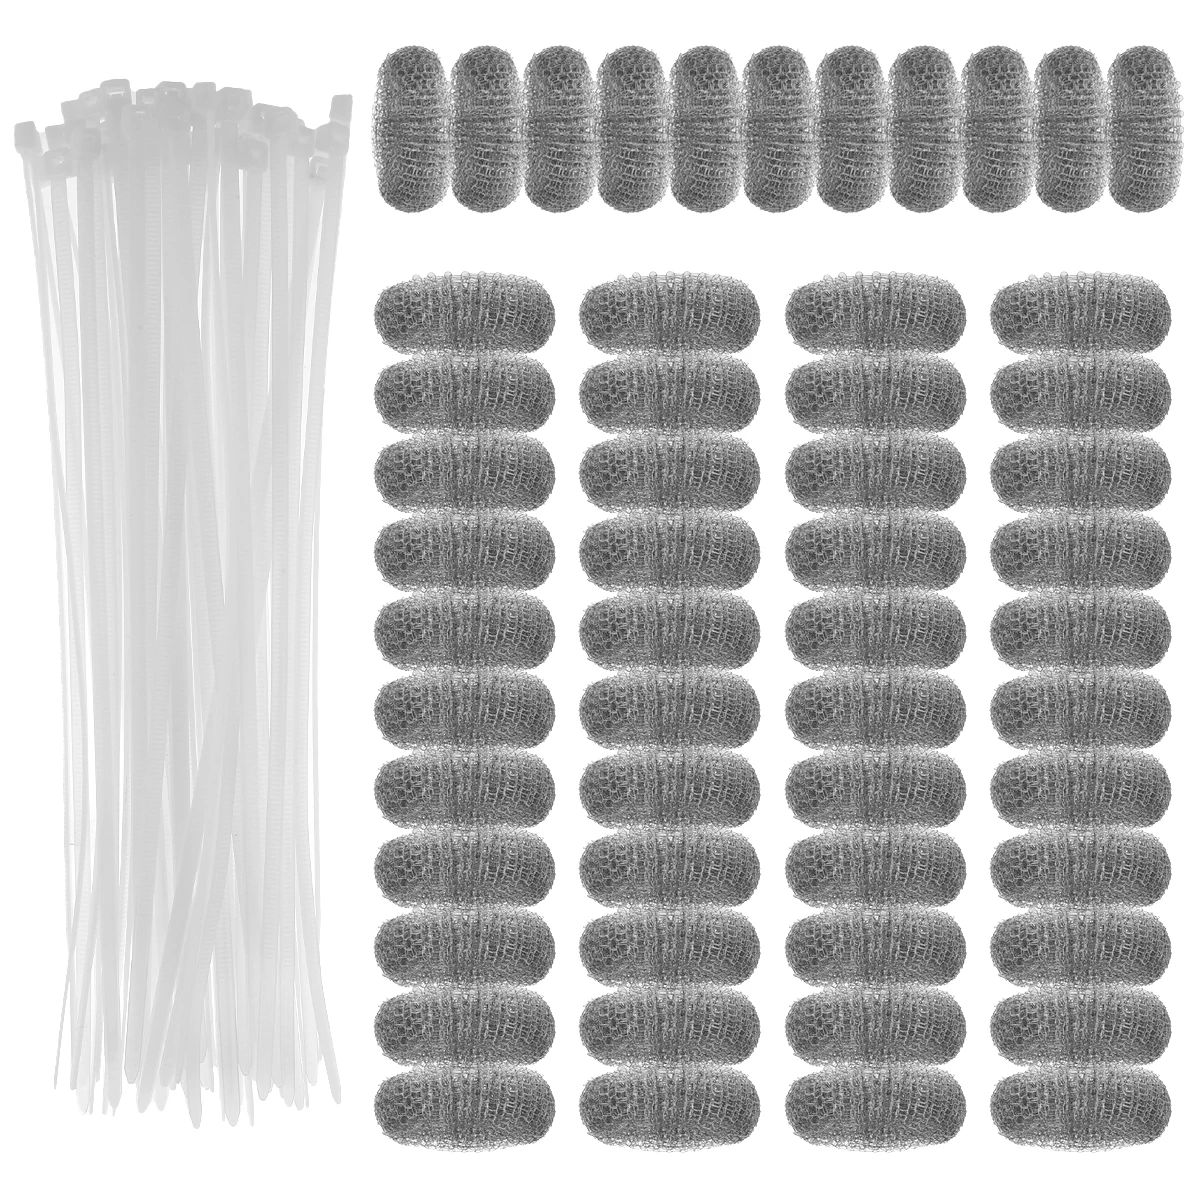 

New 50Pcs Washing Machine Lint Trap Stainless Steel Lint Snare Traps with 50 Cable Ties Durable Laundry Mesh Washer Hose Filter